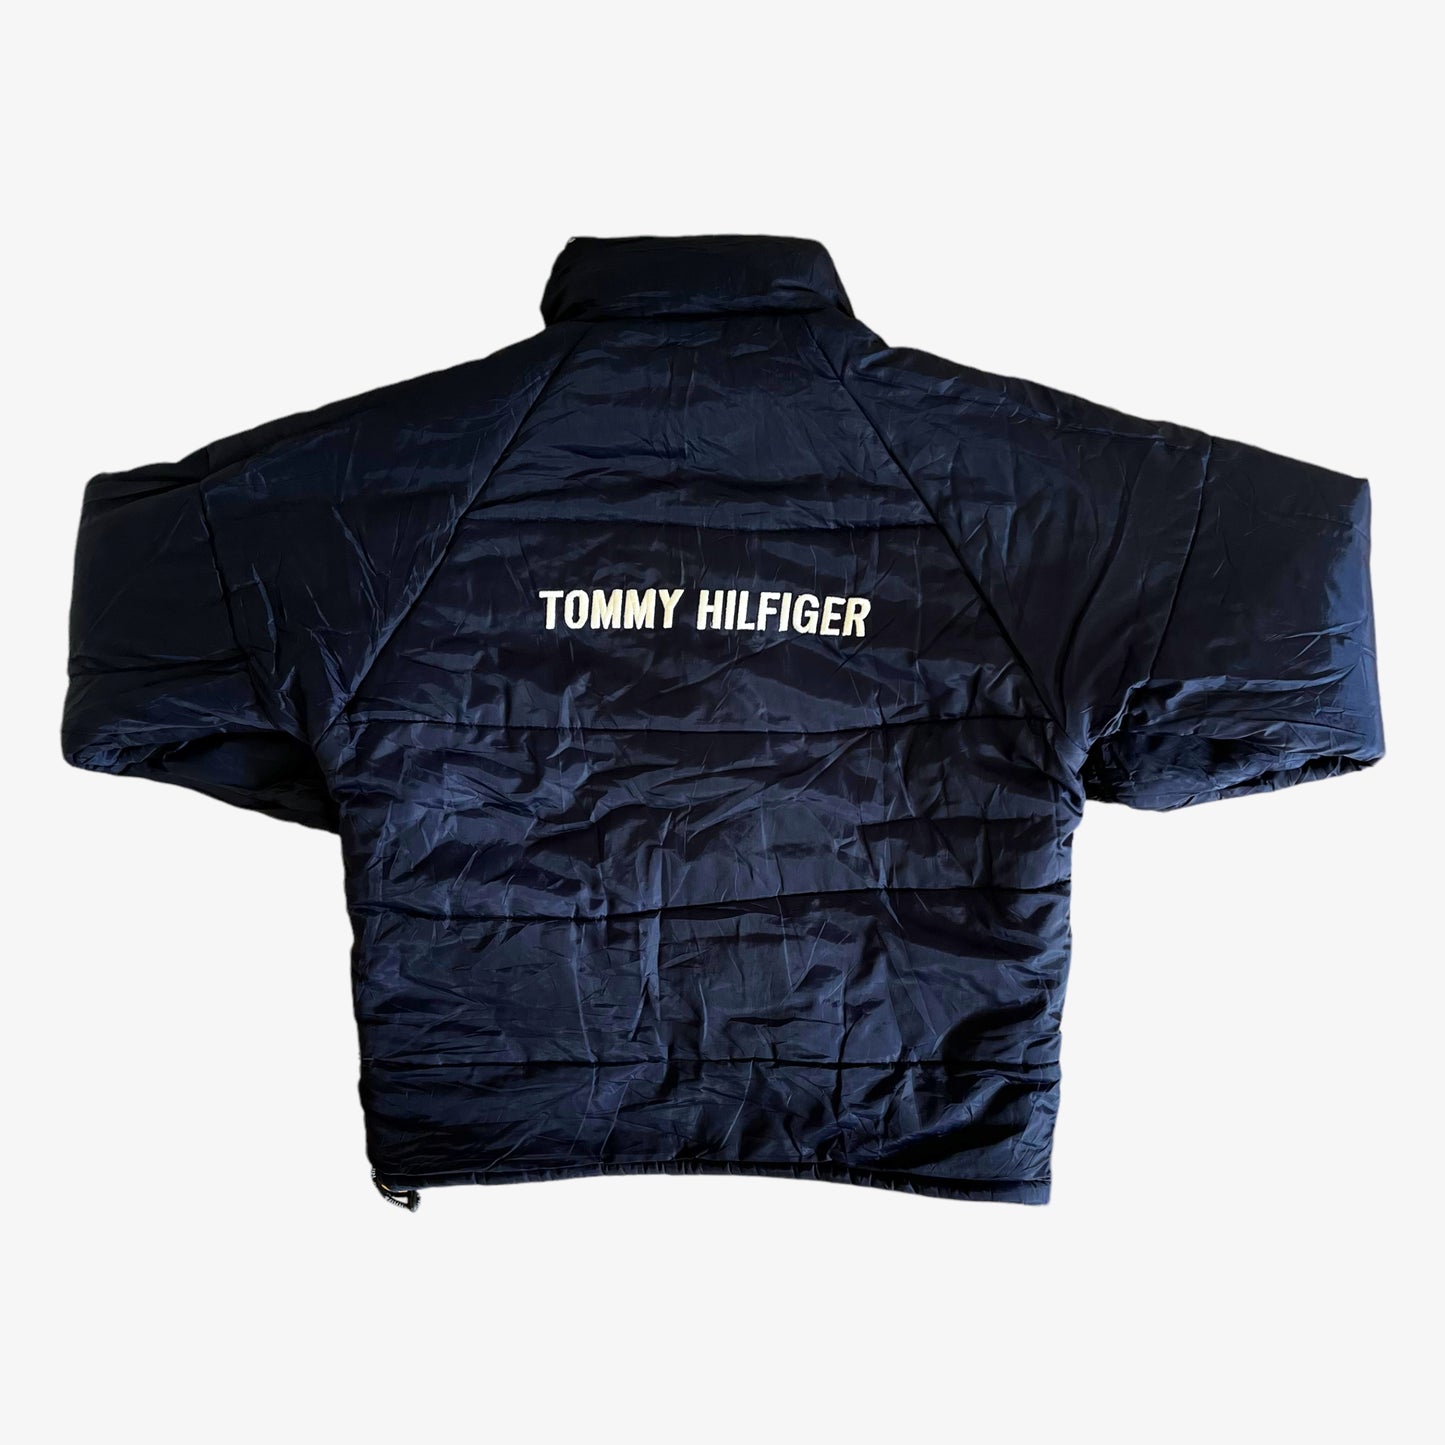 Vintage 90s Tommy Hilfiger Athletics Reversible Spell Out Puffer Jacket Reverse Back - Casspios Dream